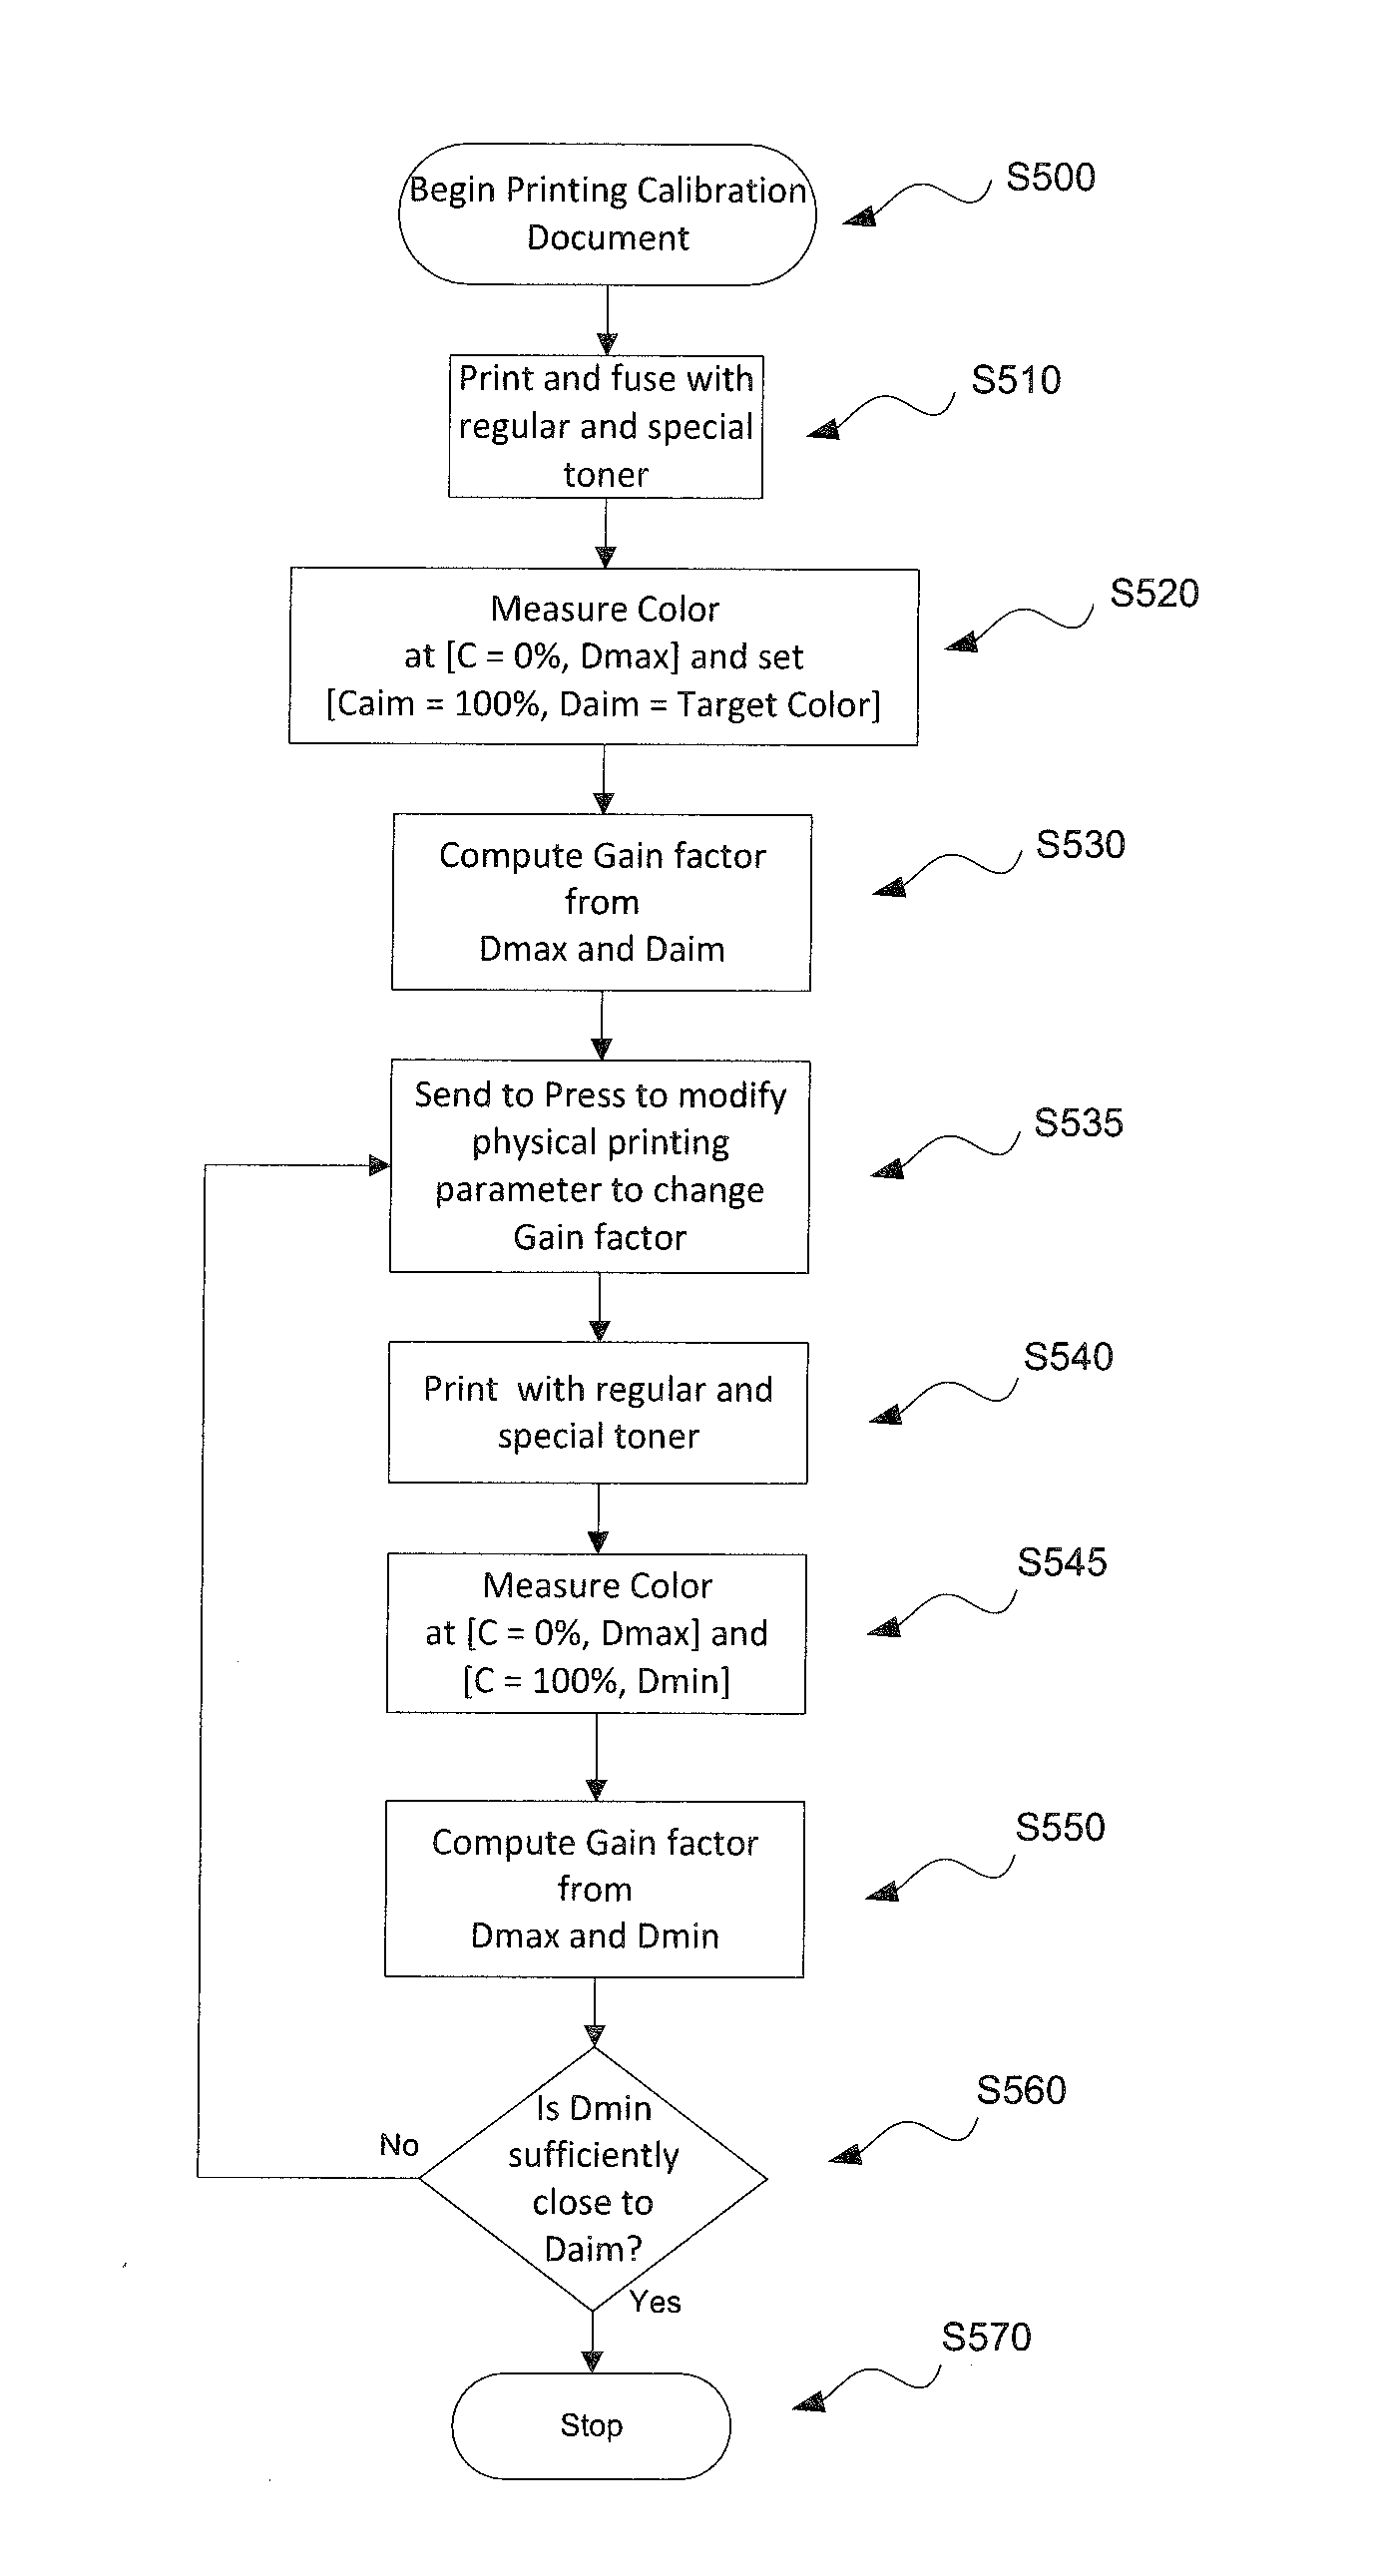 Method for calibrating specialty color toner